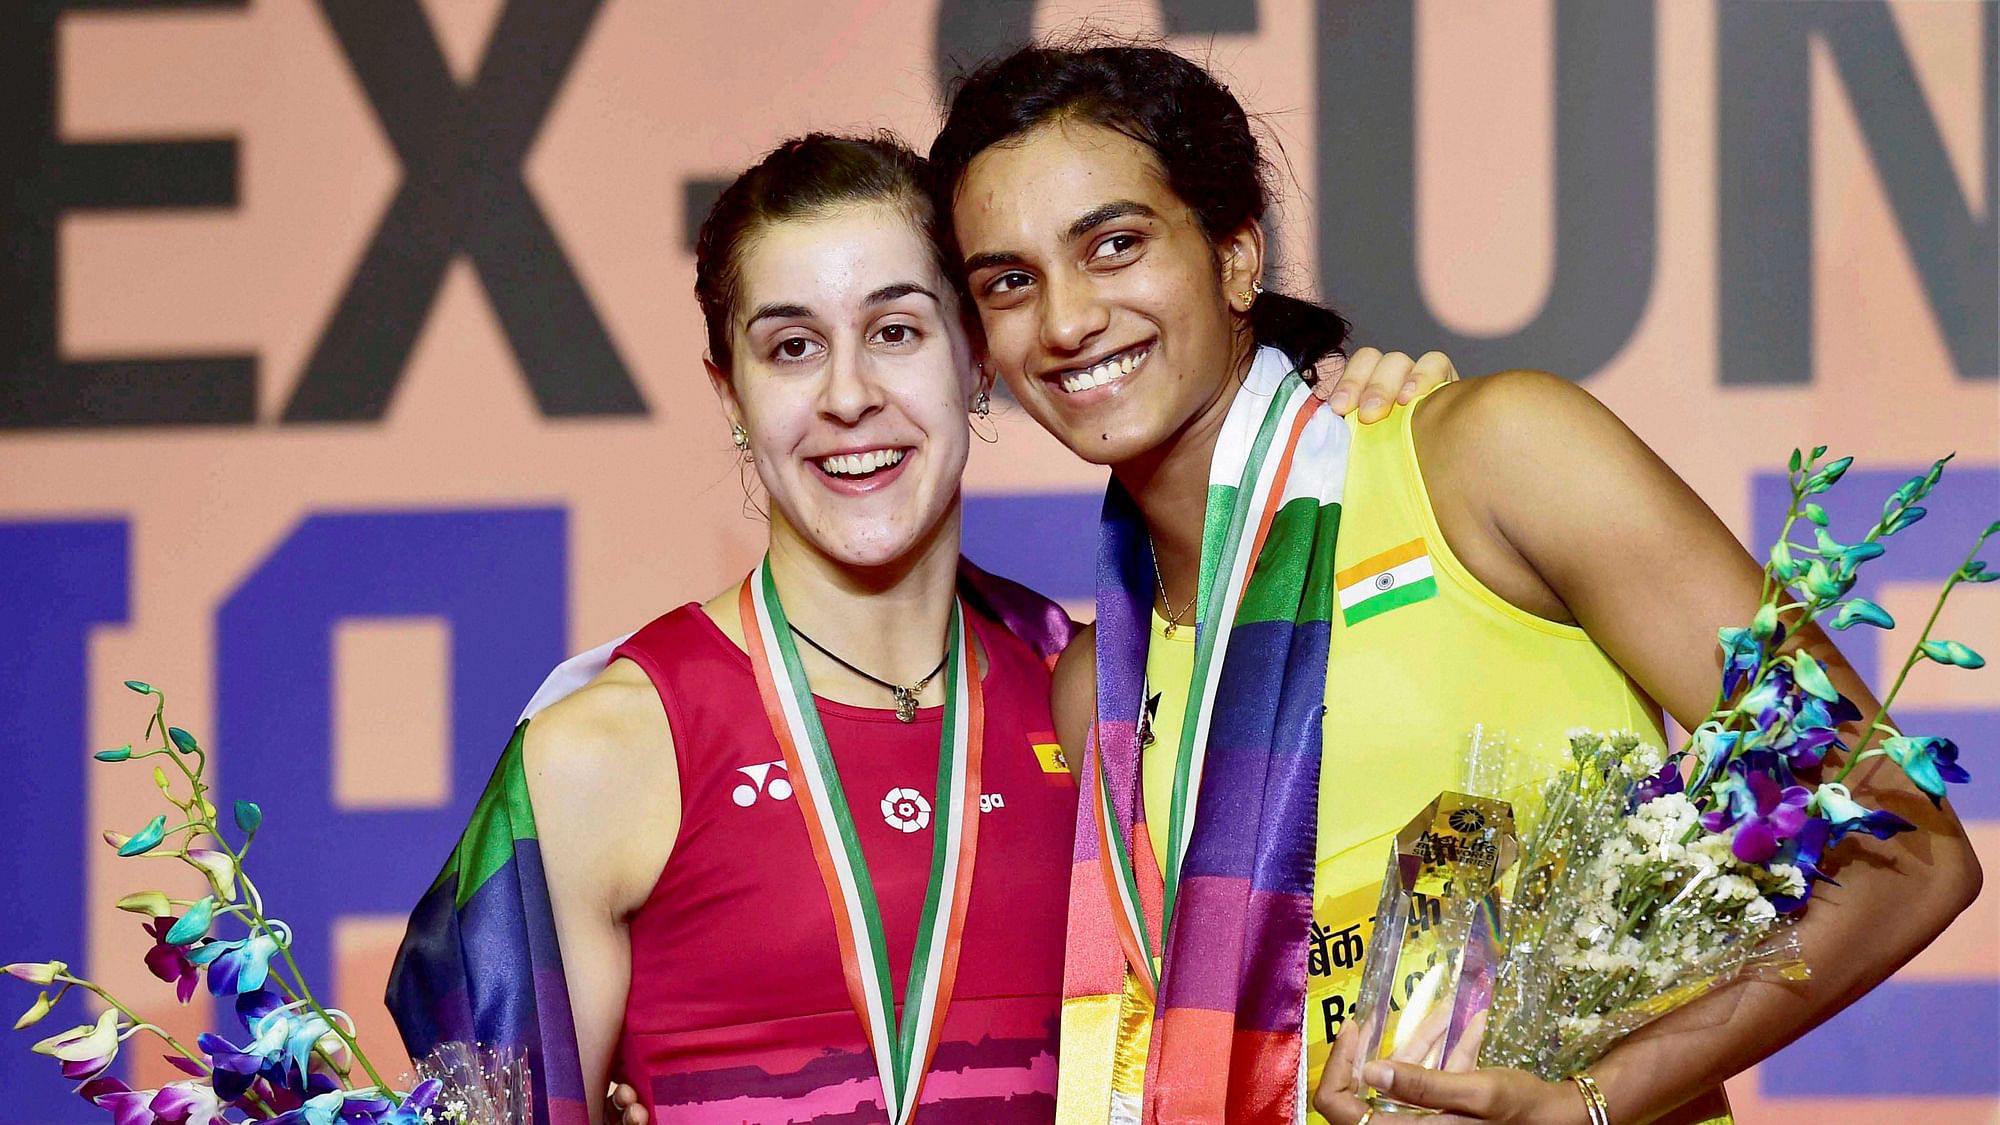 PV Sindhu and Carolina Marin after the India Open Super Series Final in April 2017.